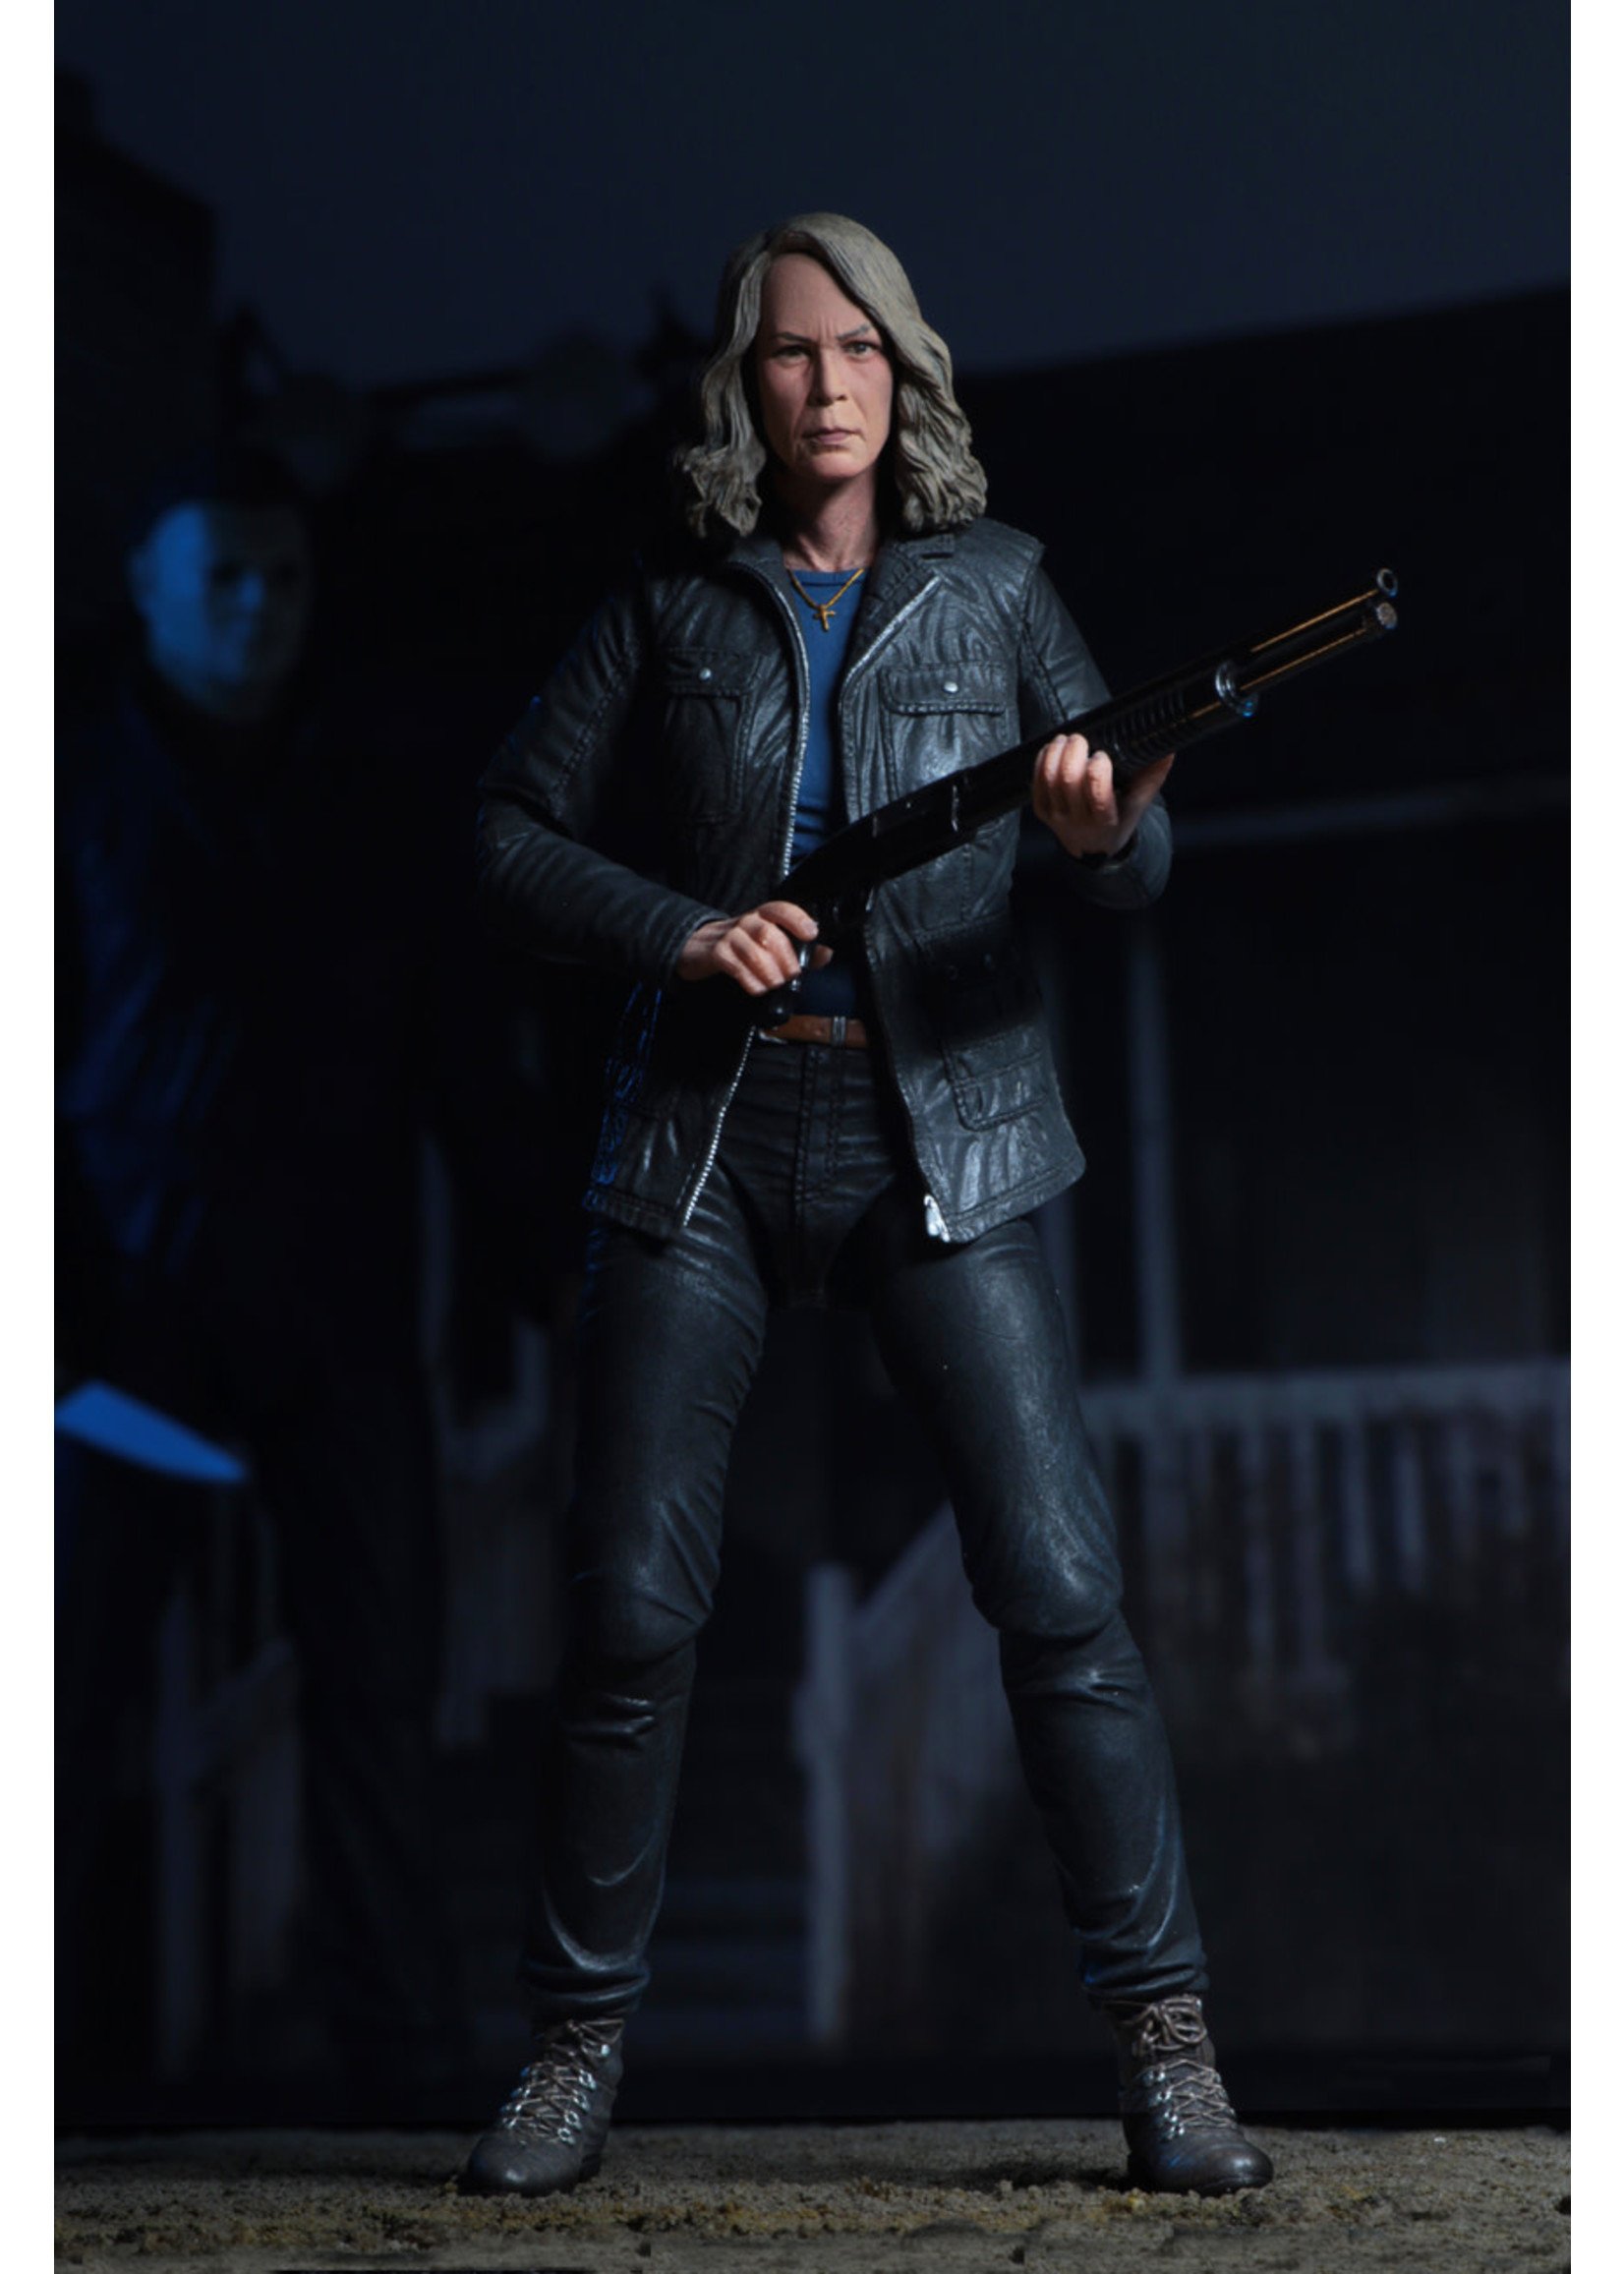 NECA Halloween (2018) - 7" Scale Action Figure - Ultimate Laurie Strode